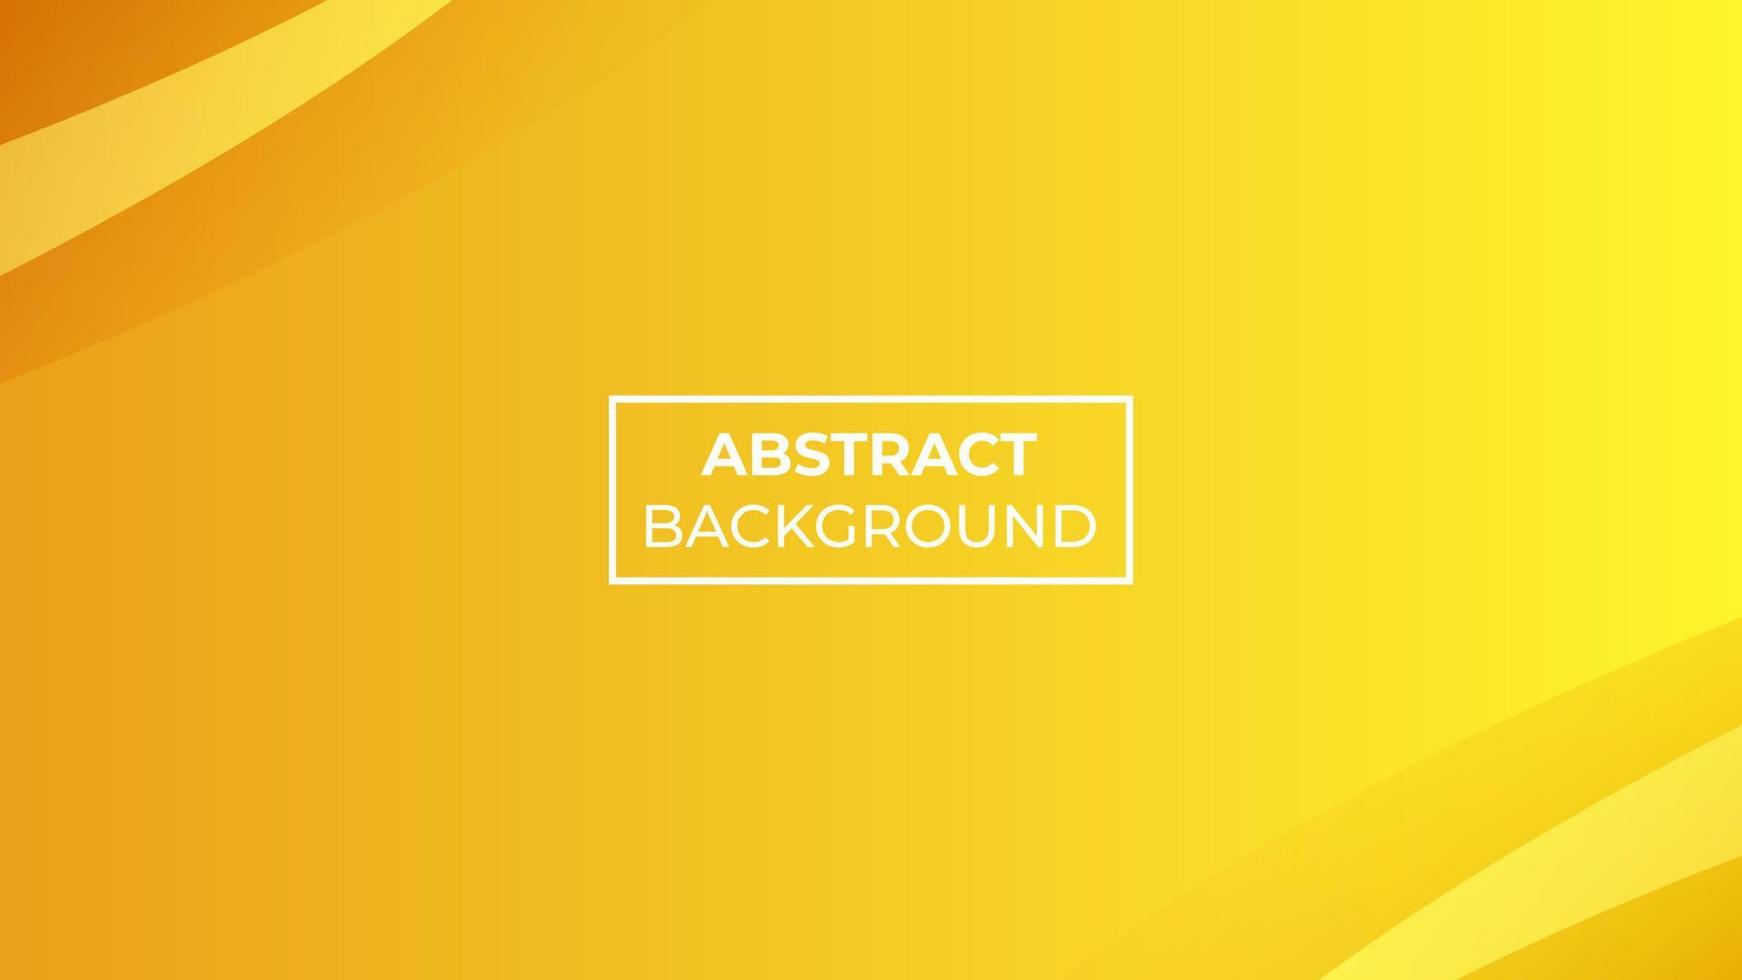 Abstract background in dark yellow and light yellow  , easy to edit vector